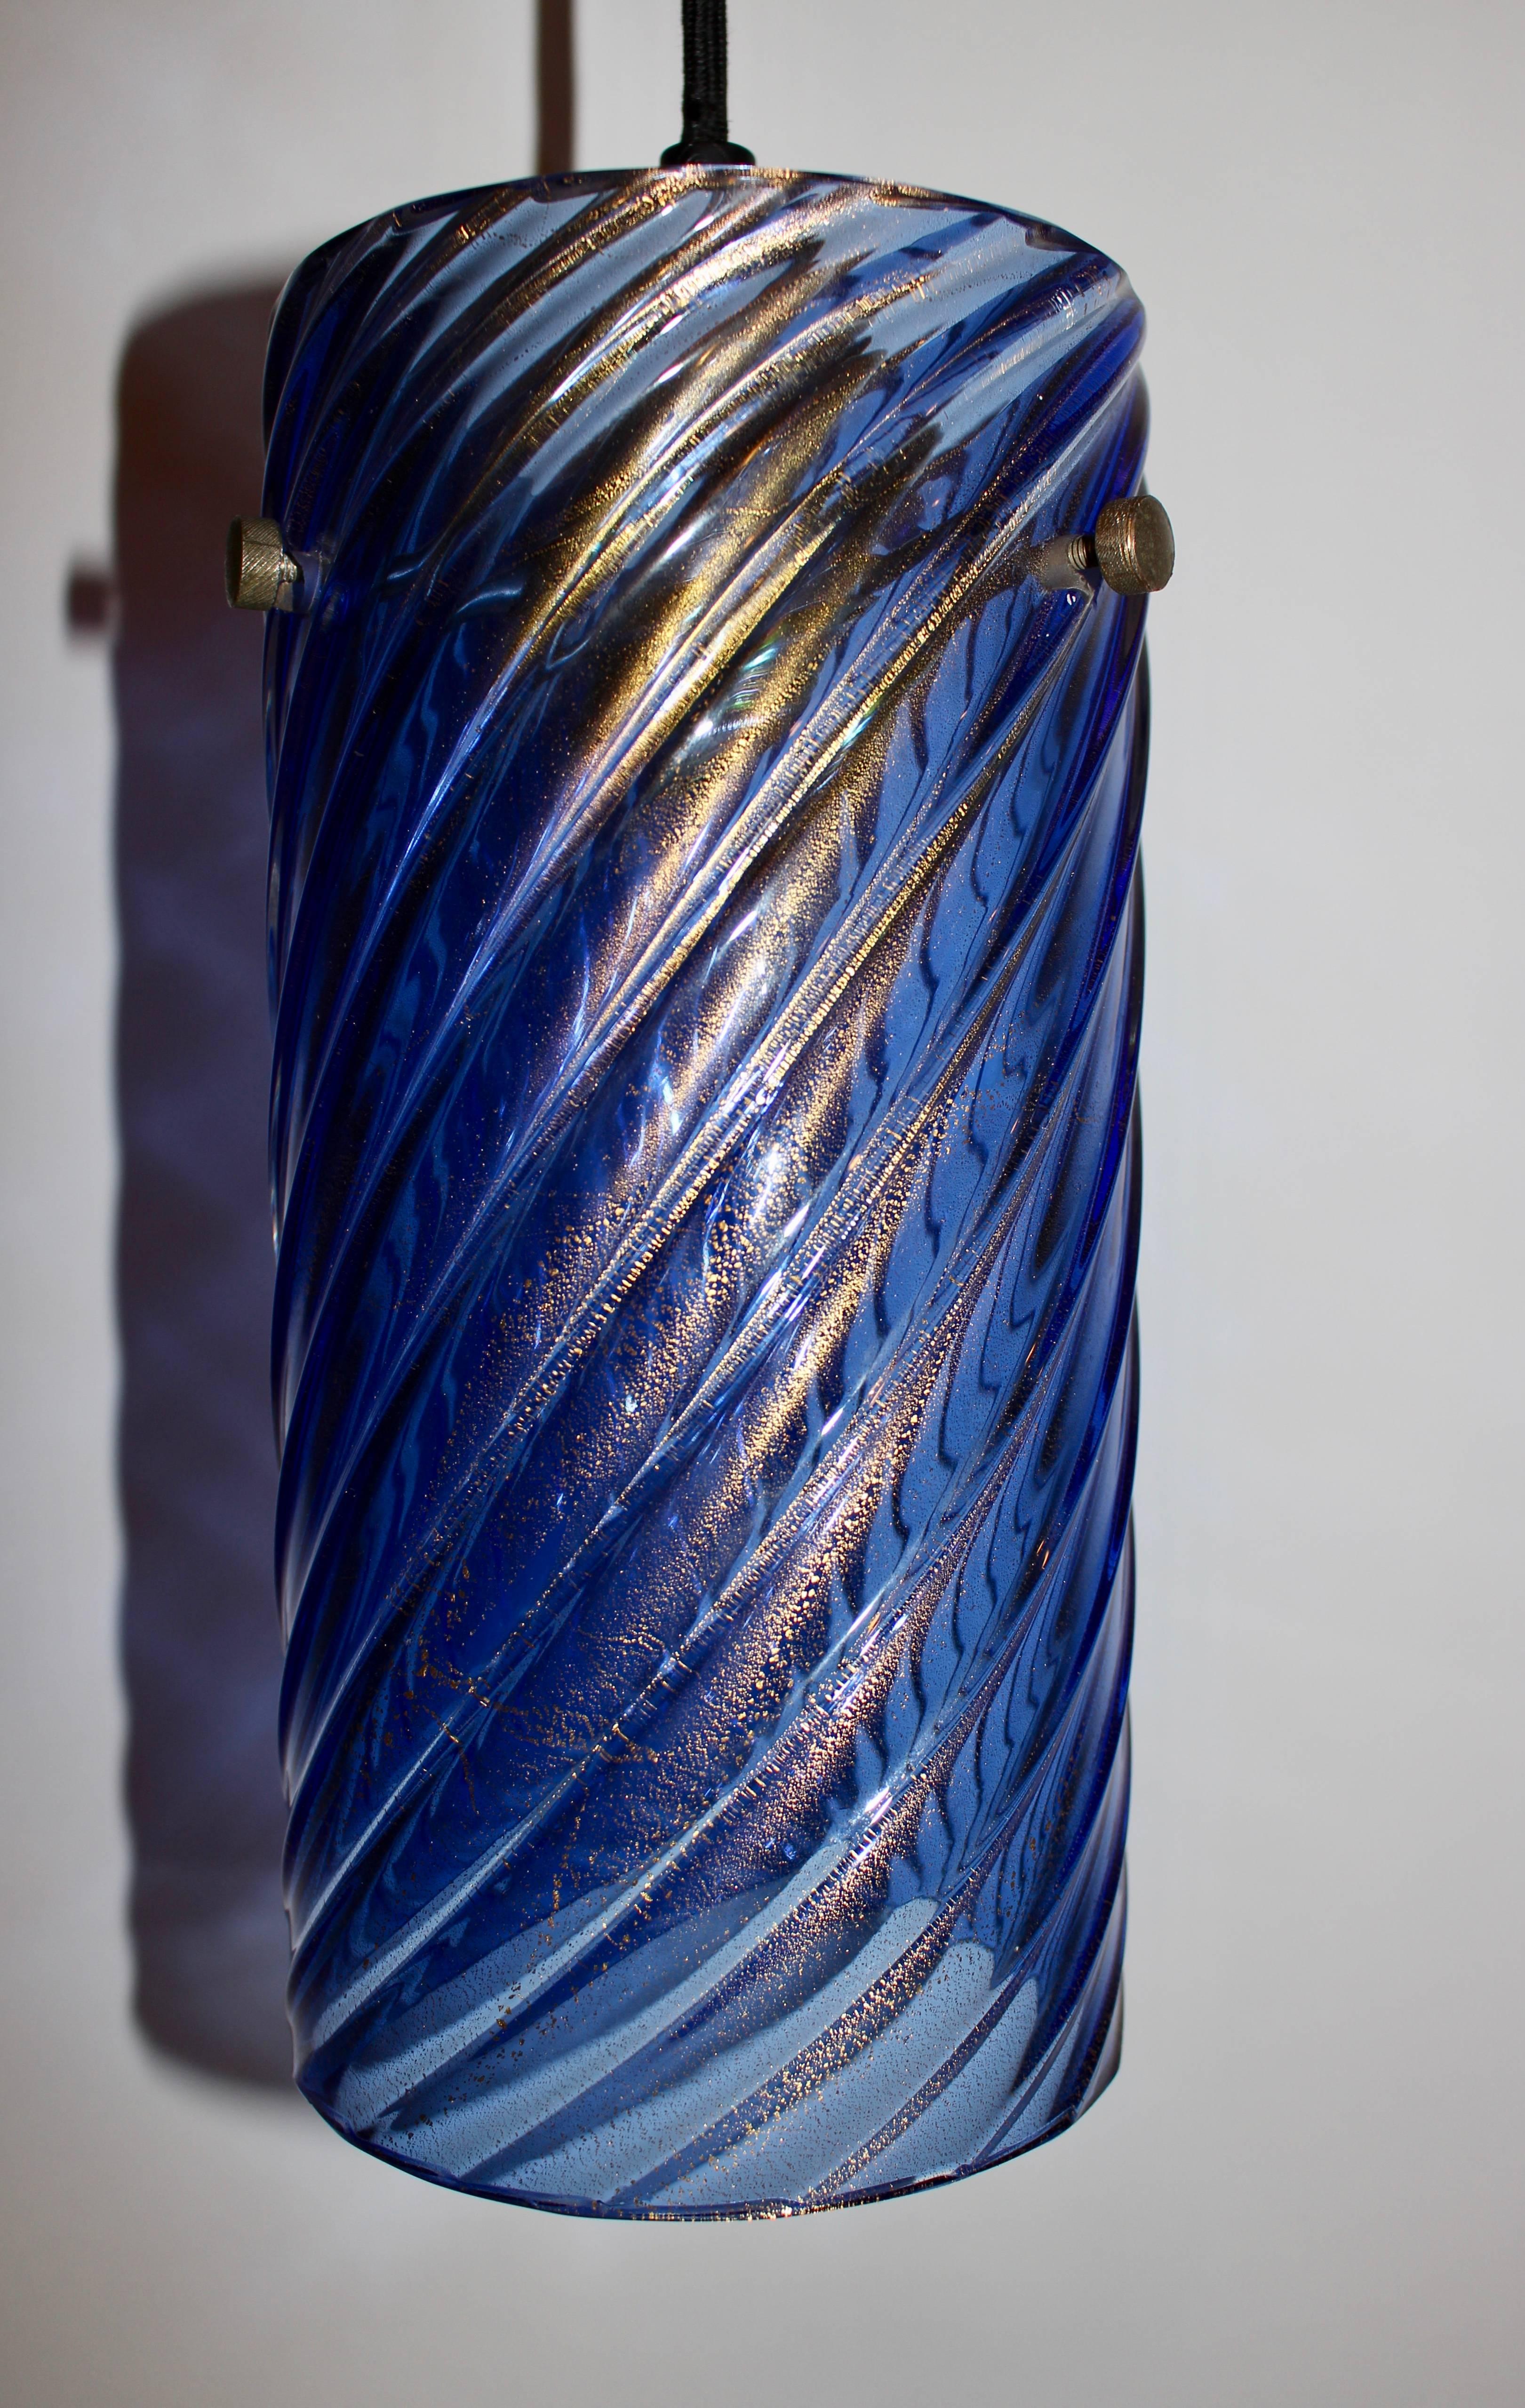 Slim, ribbed Venetian Glass Spiral Twist Blue and Gold flecked Hanging Lamp. Featuring a 5D cylinder in translucent Deep Cobalt Blue glass with Gold highlights. With five foot Black cord, nickel-plated 3.5D ceiling cap and socket cover. Ceramic